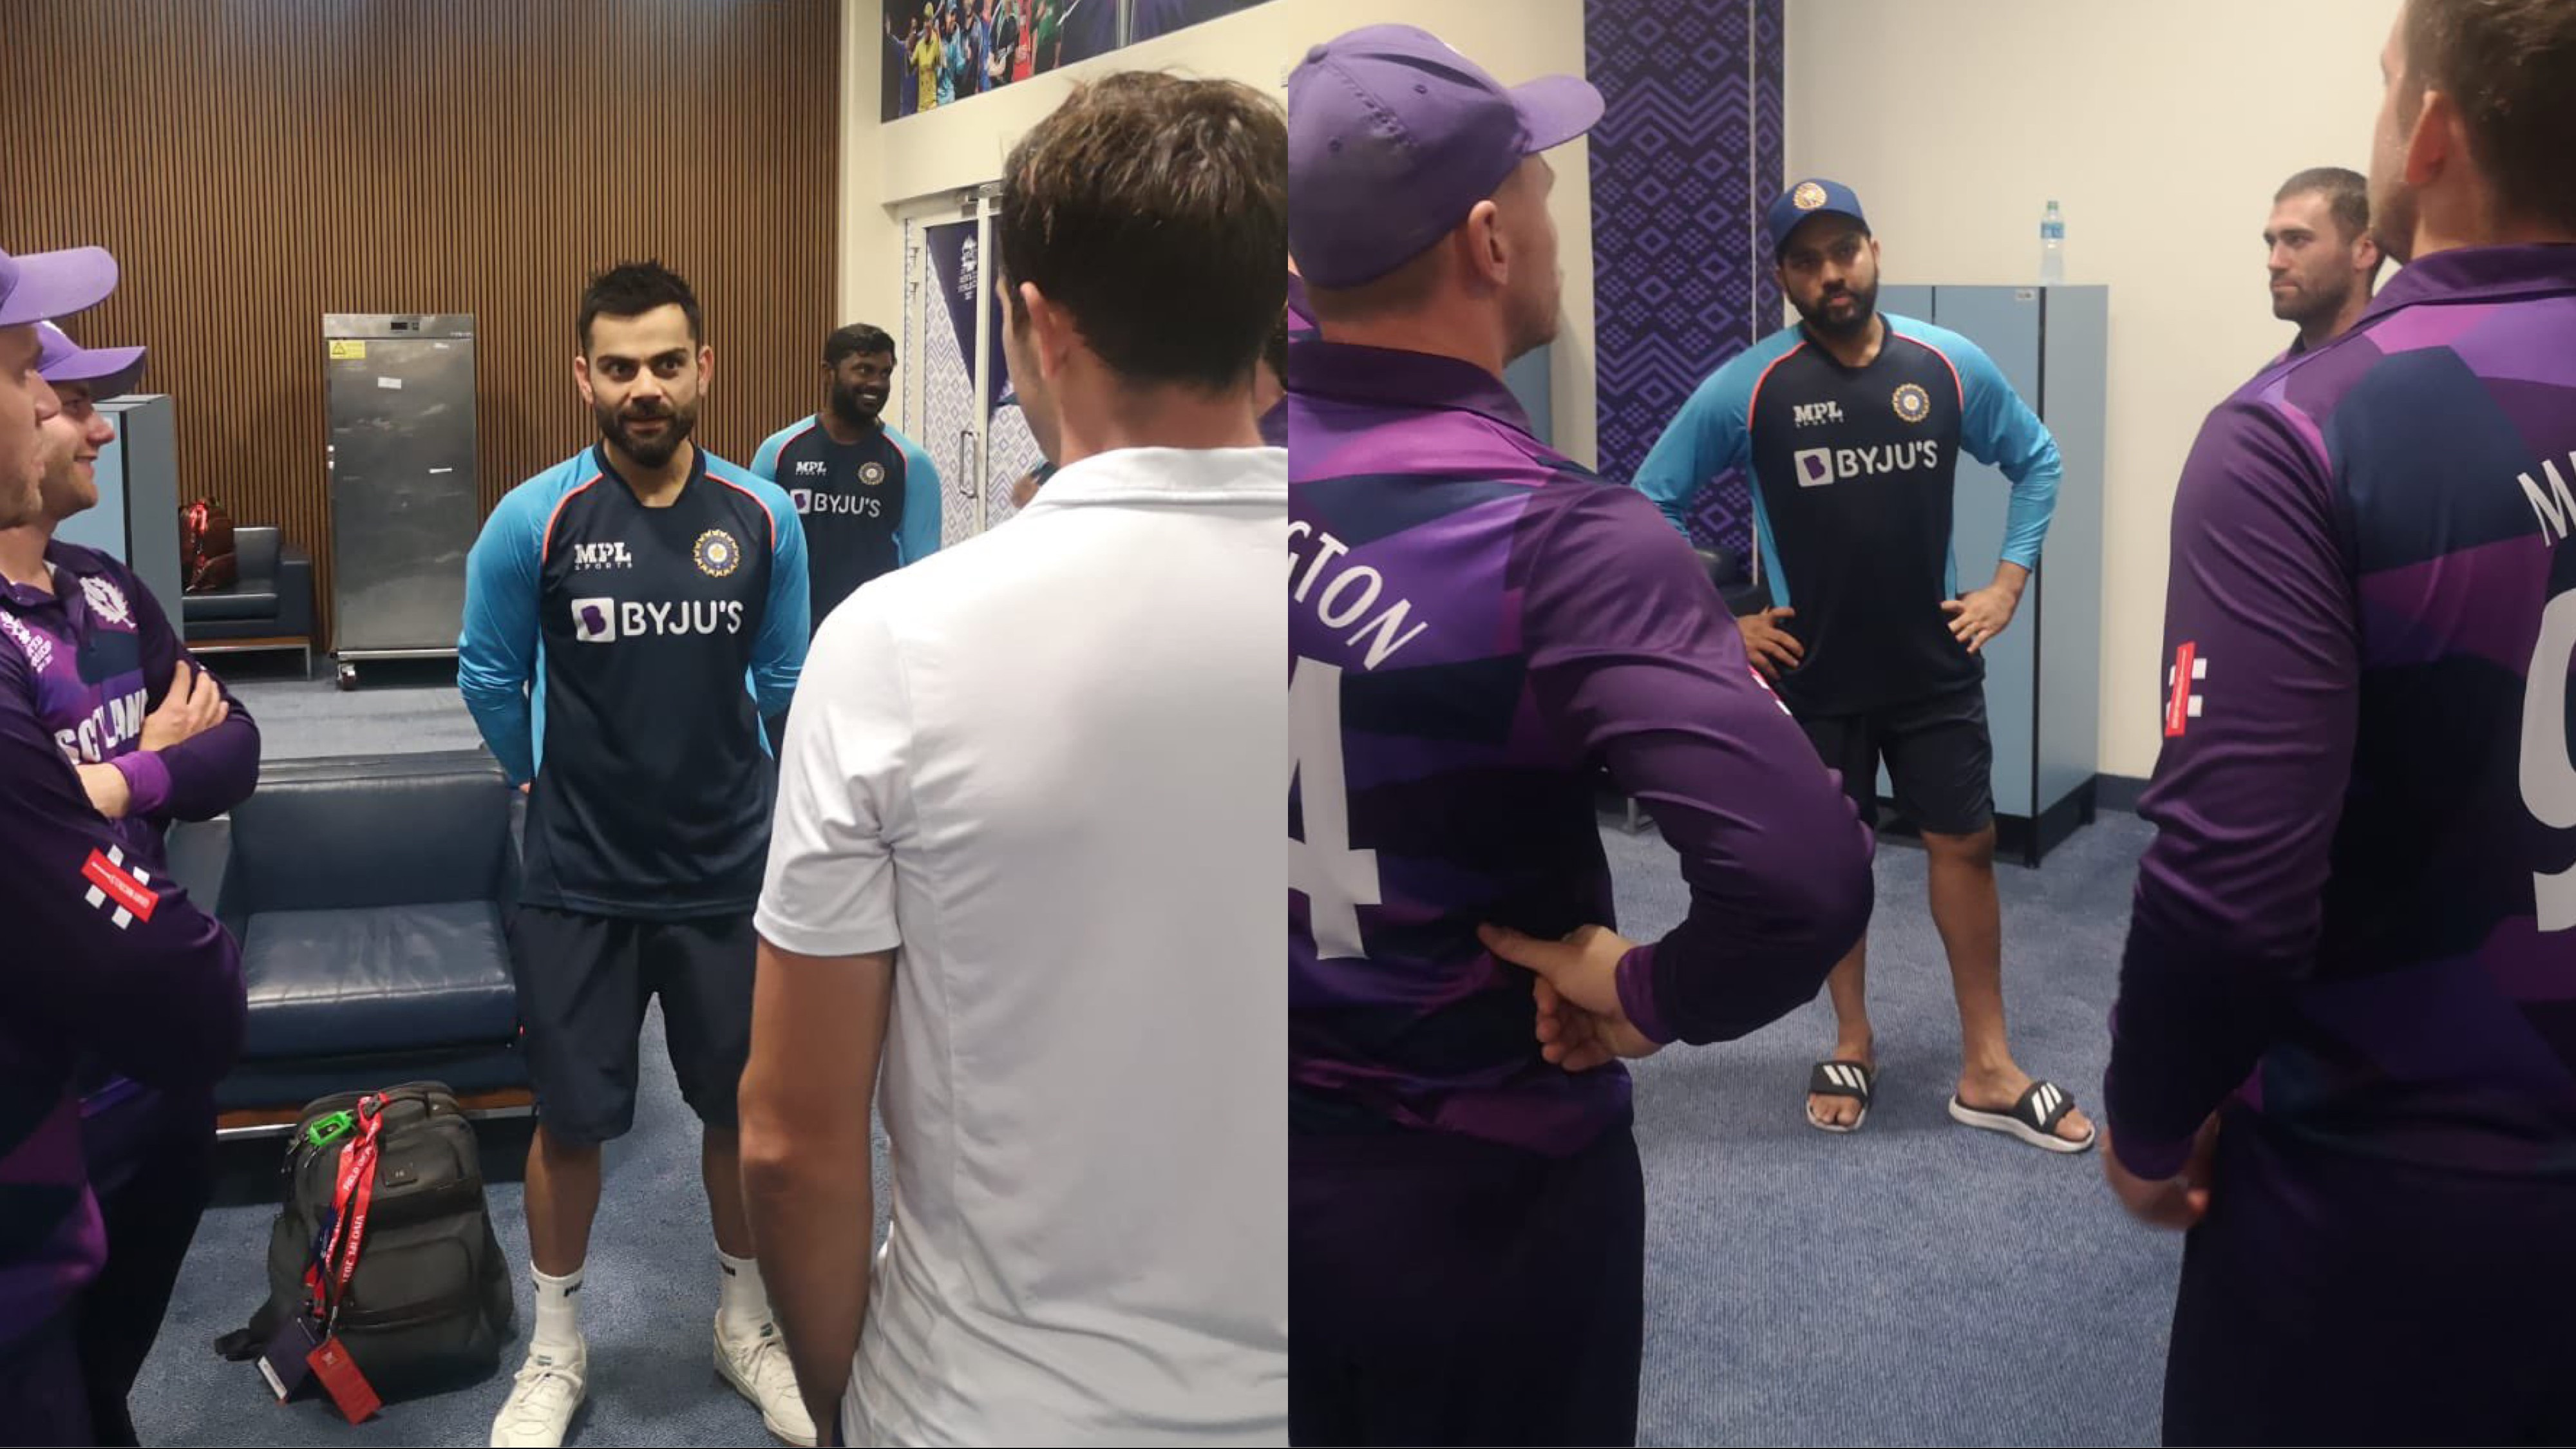 T20 World Cup 2021: PICS - Scotland players visit Team India dressing room after the match